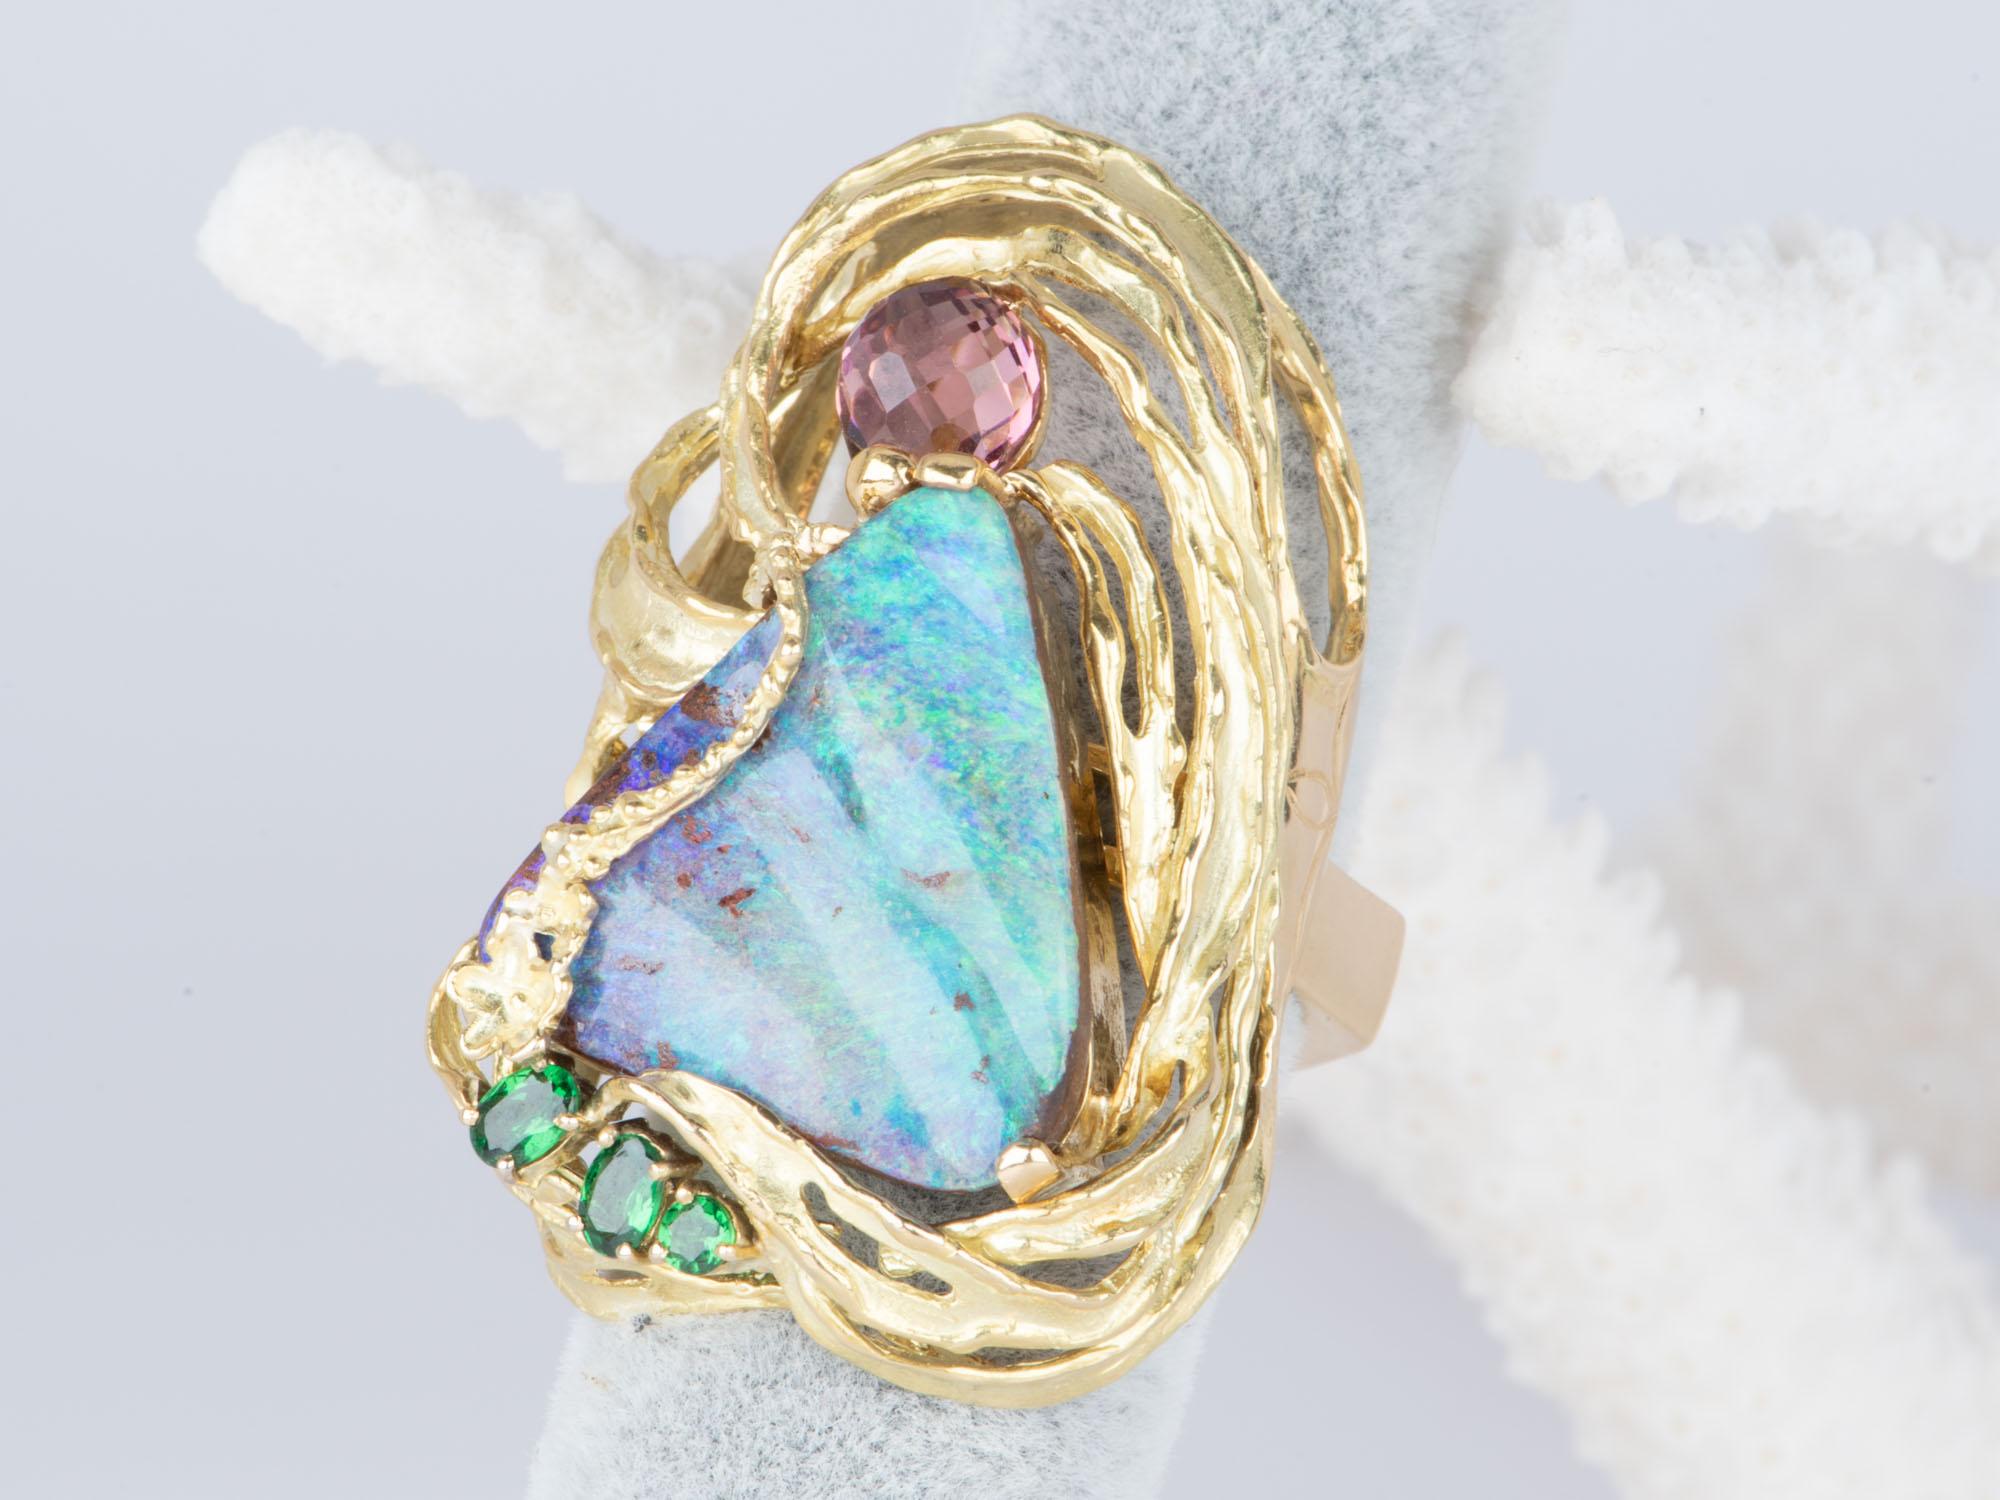 This stunning one-of-a-kind Australian Boulder Opal Ring Pendant Combo is a work of art! Handcrafted in solid 18K gold, it features a flowy organic design and a vibrant mix of colorful gemstones that are sure to captivate the eye. An exclusive and